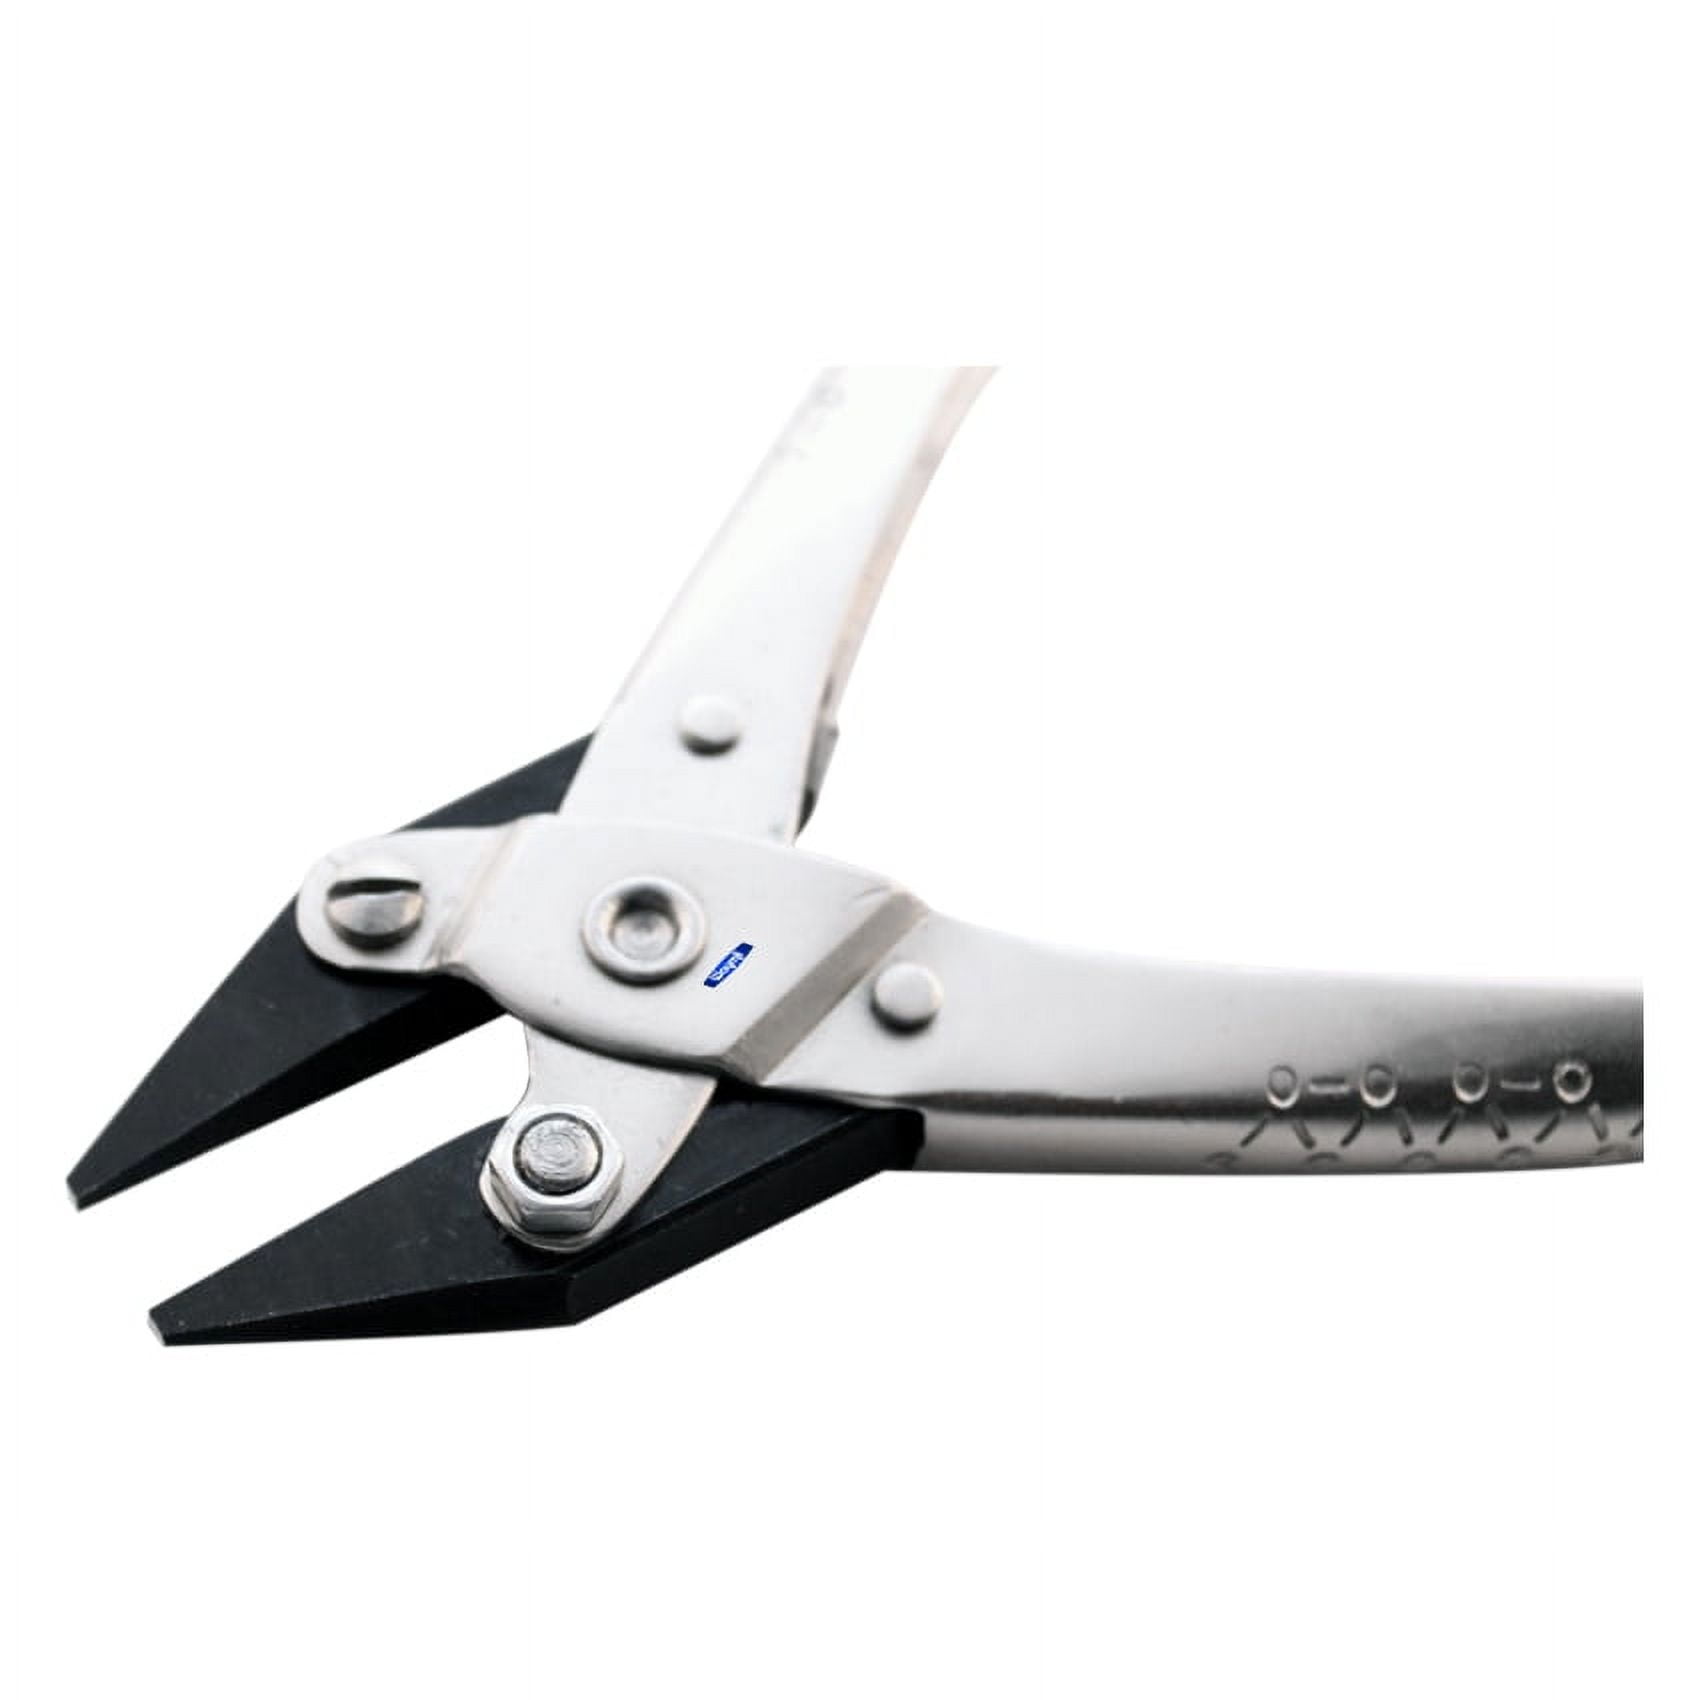 Parallel Action Chain Nose Pliers Smooth Jaw with PVC Coated